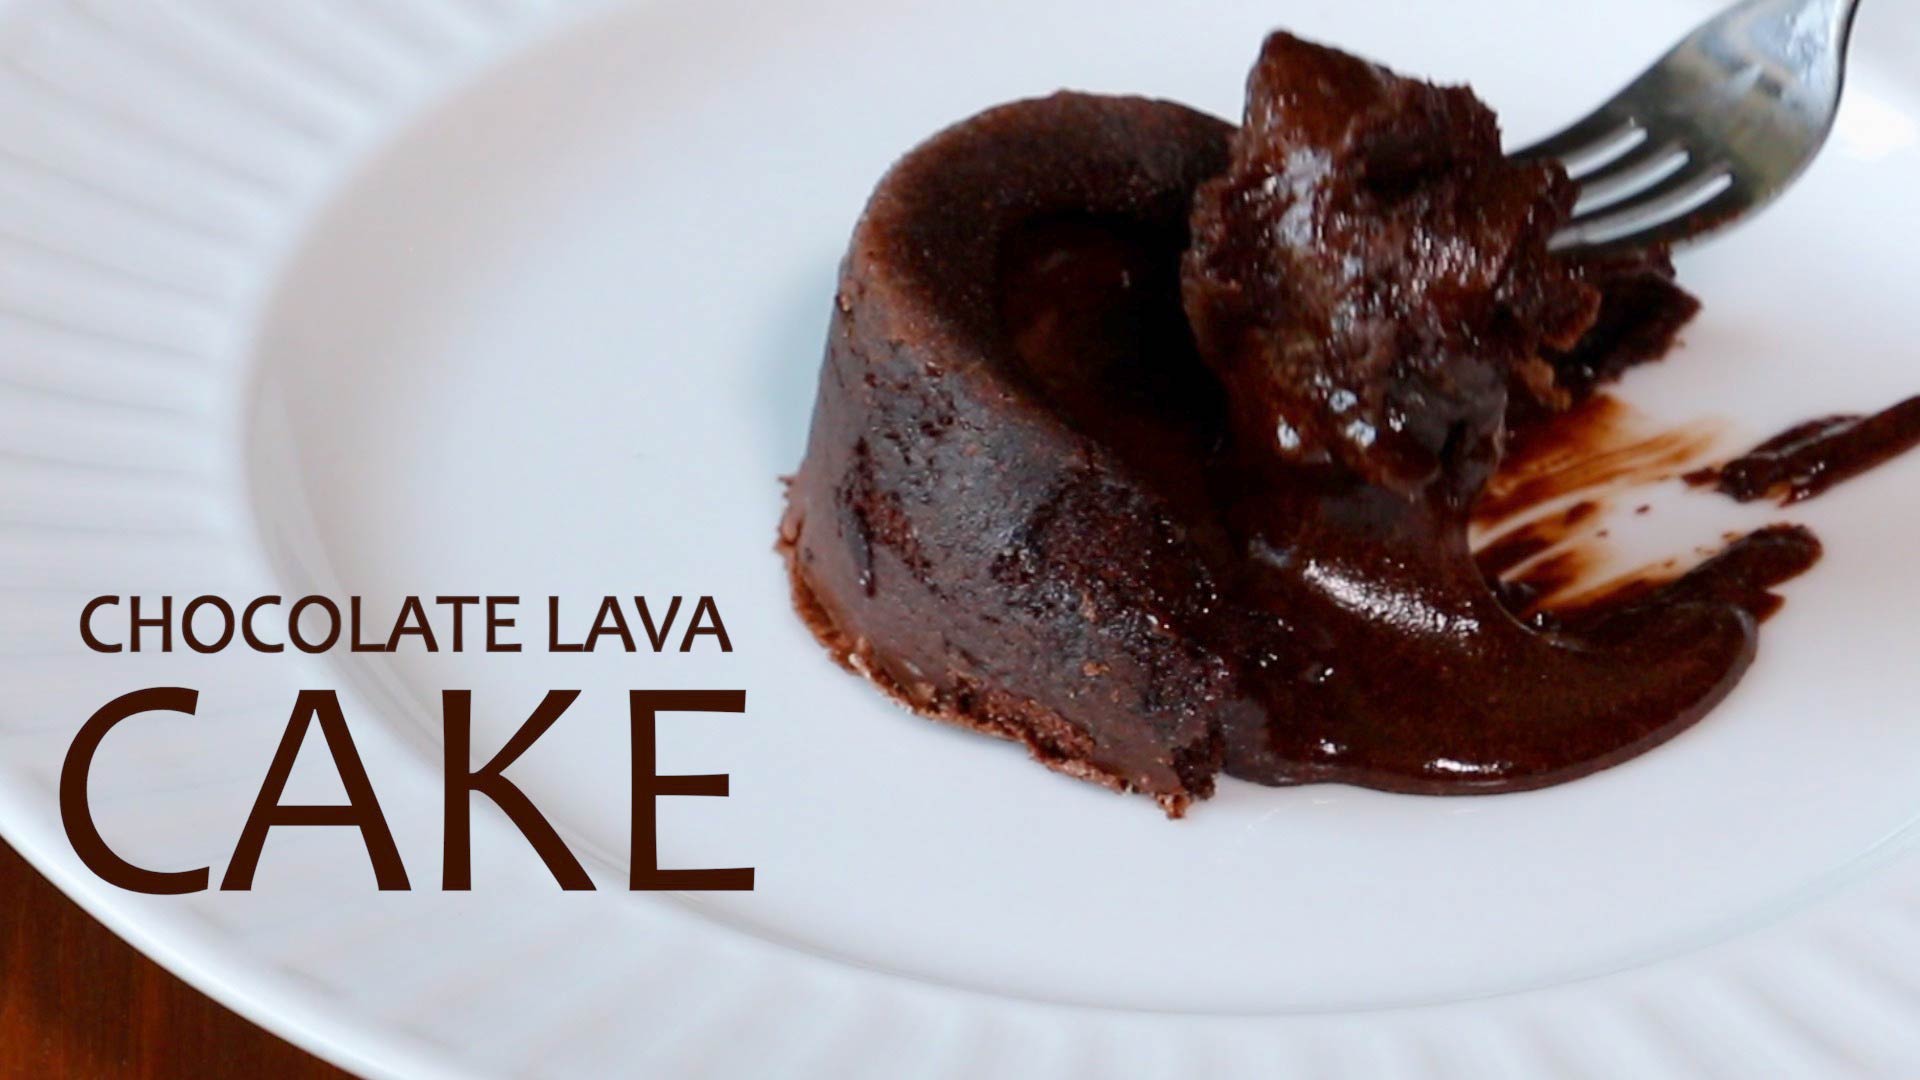 Chocolate Lava Cakes For Two: The Perfect Valentine's Day Dessert